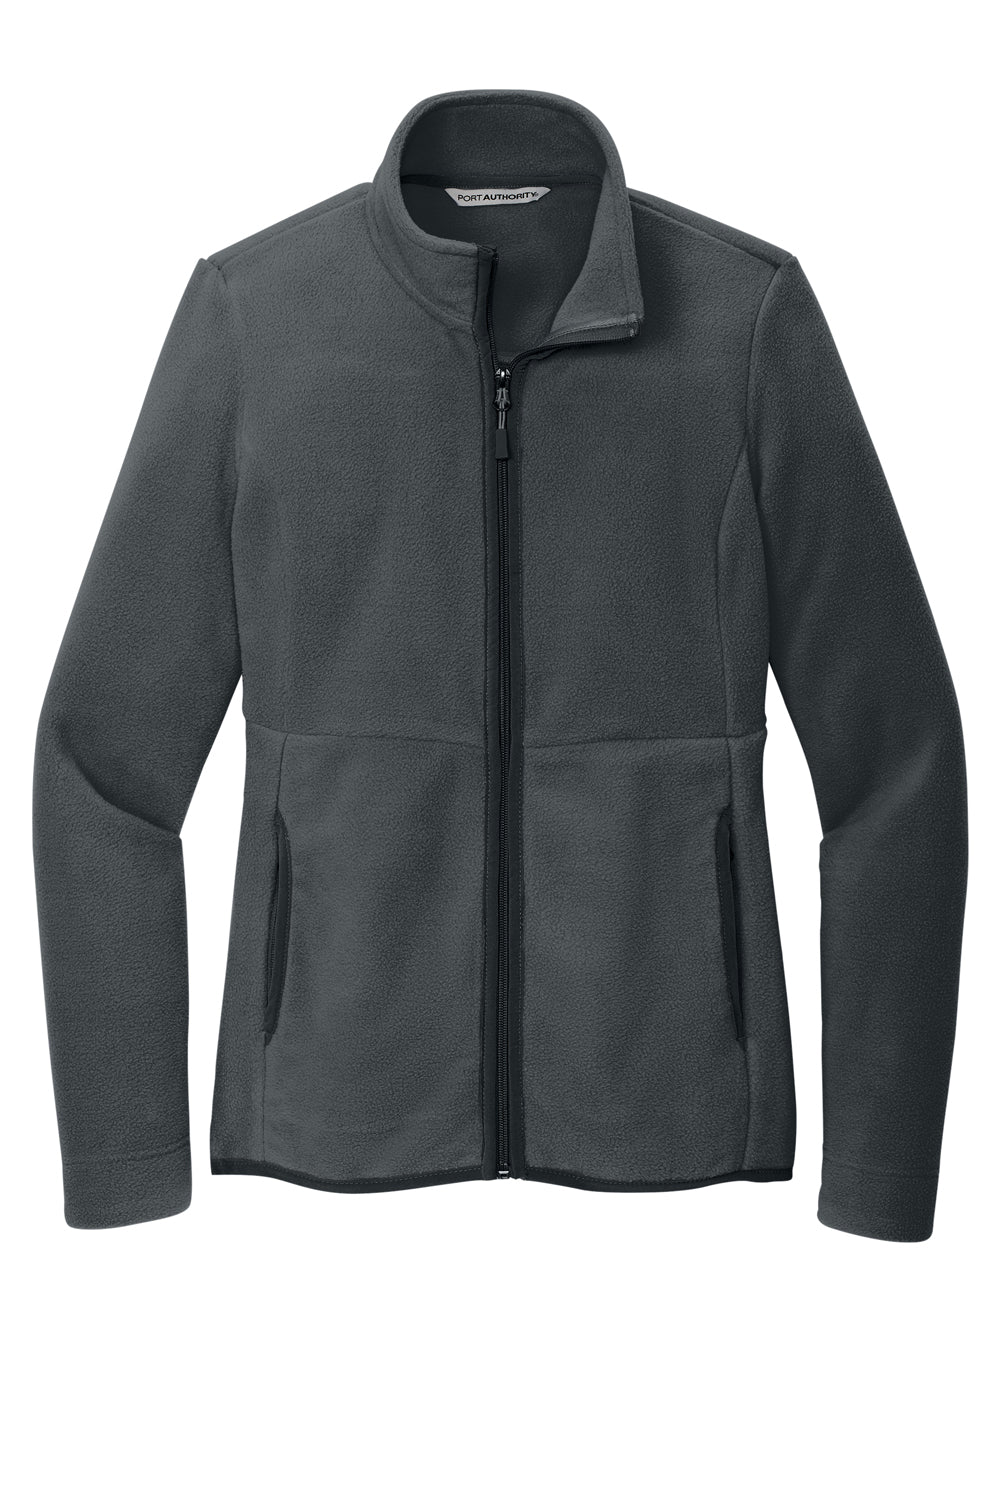 Port Authority L110 Womens Connection Fleece Full Zip Jacket Charcoal Grey Flat Front